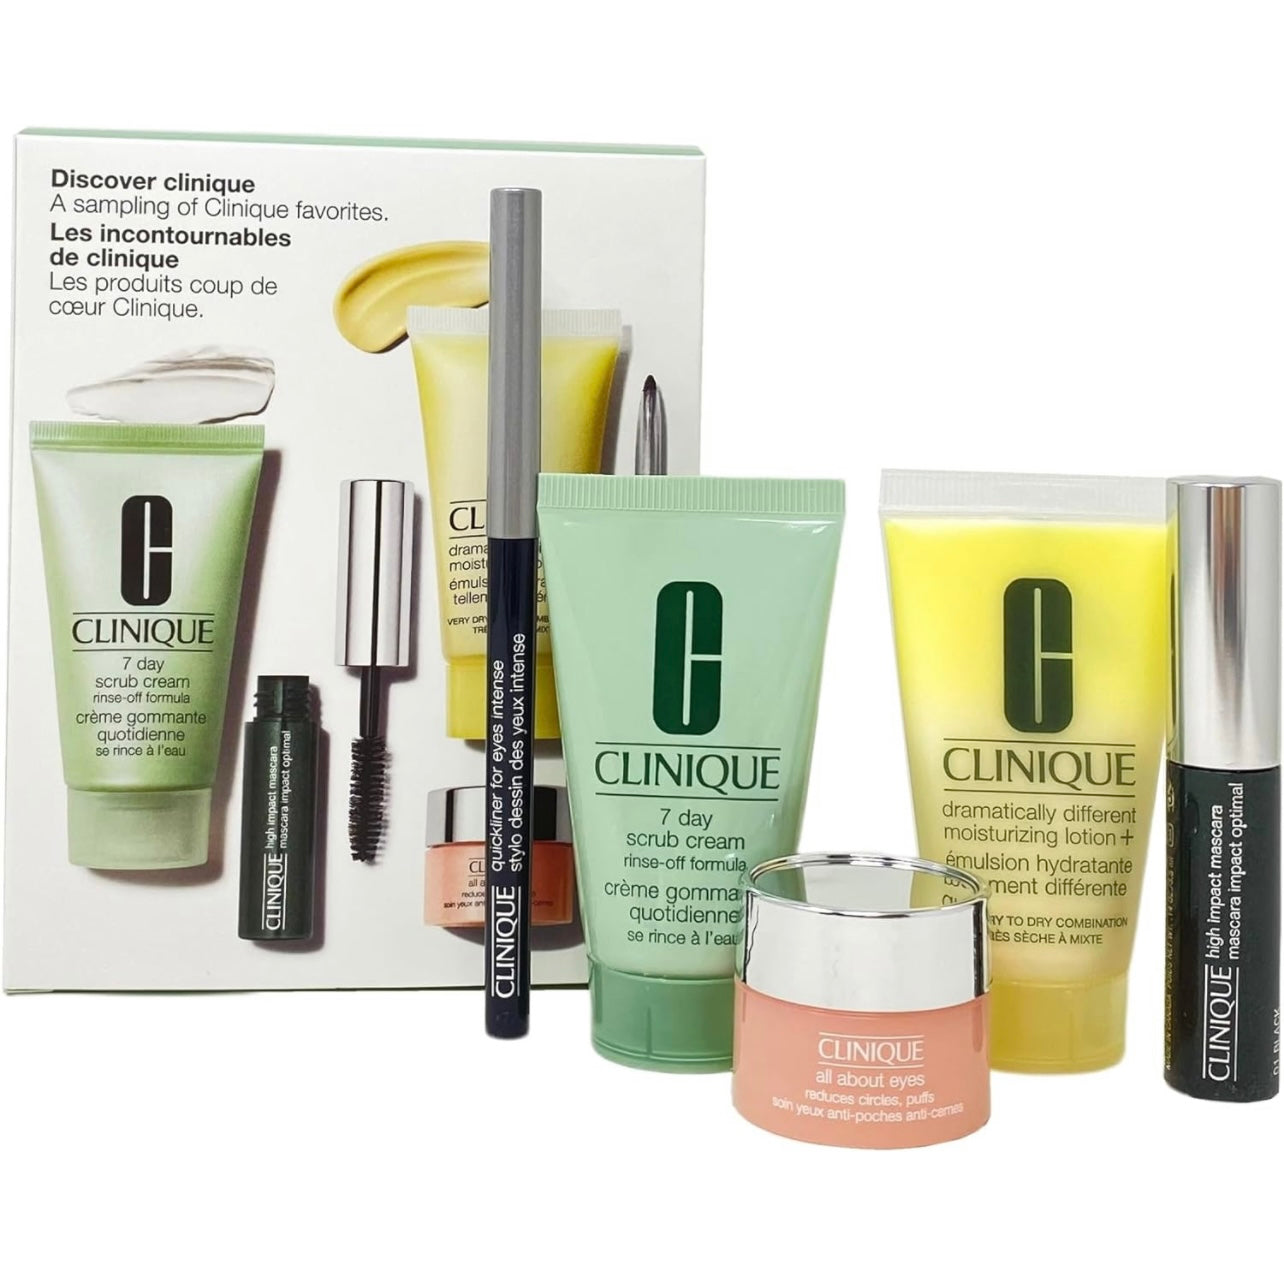 Clinique (5) Piece Discovery Gift Set W/Free Matching Cosmetic Bag | All Fullsize items